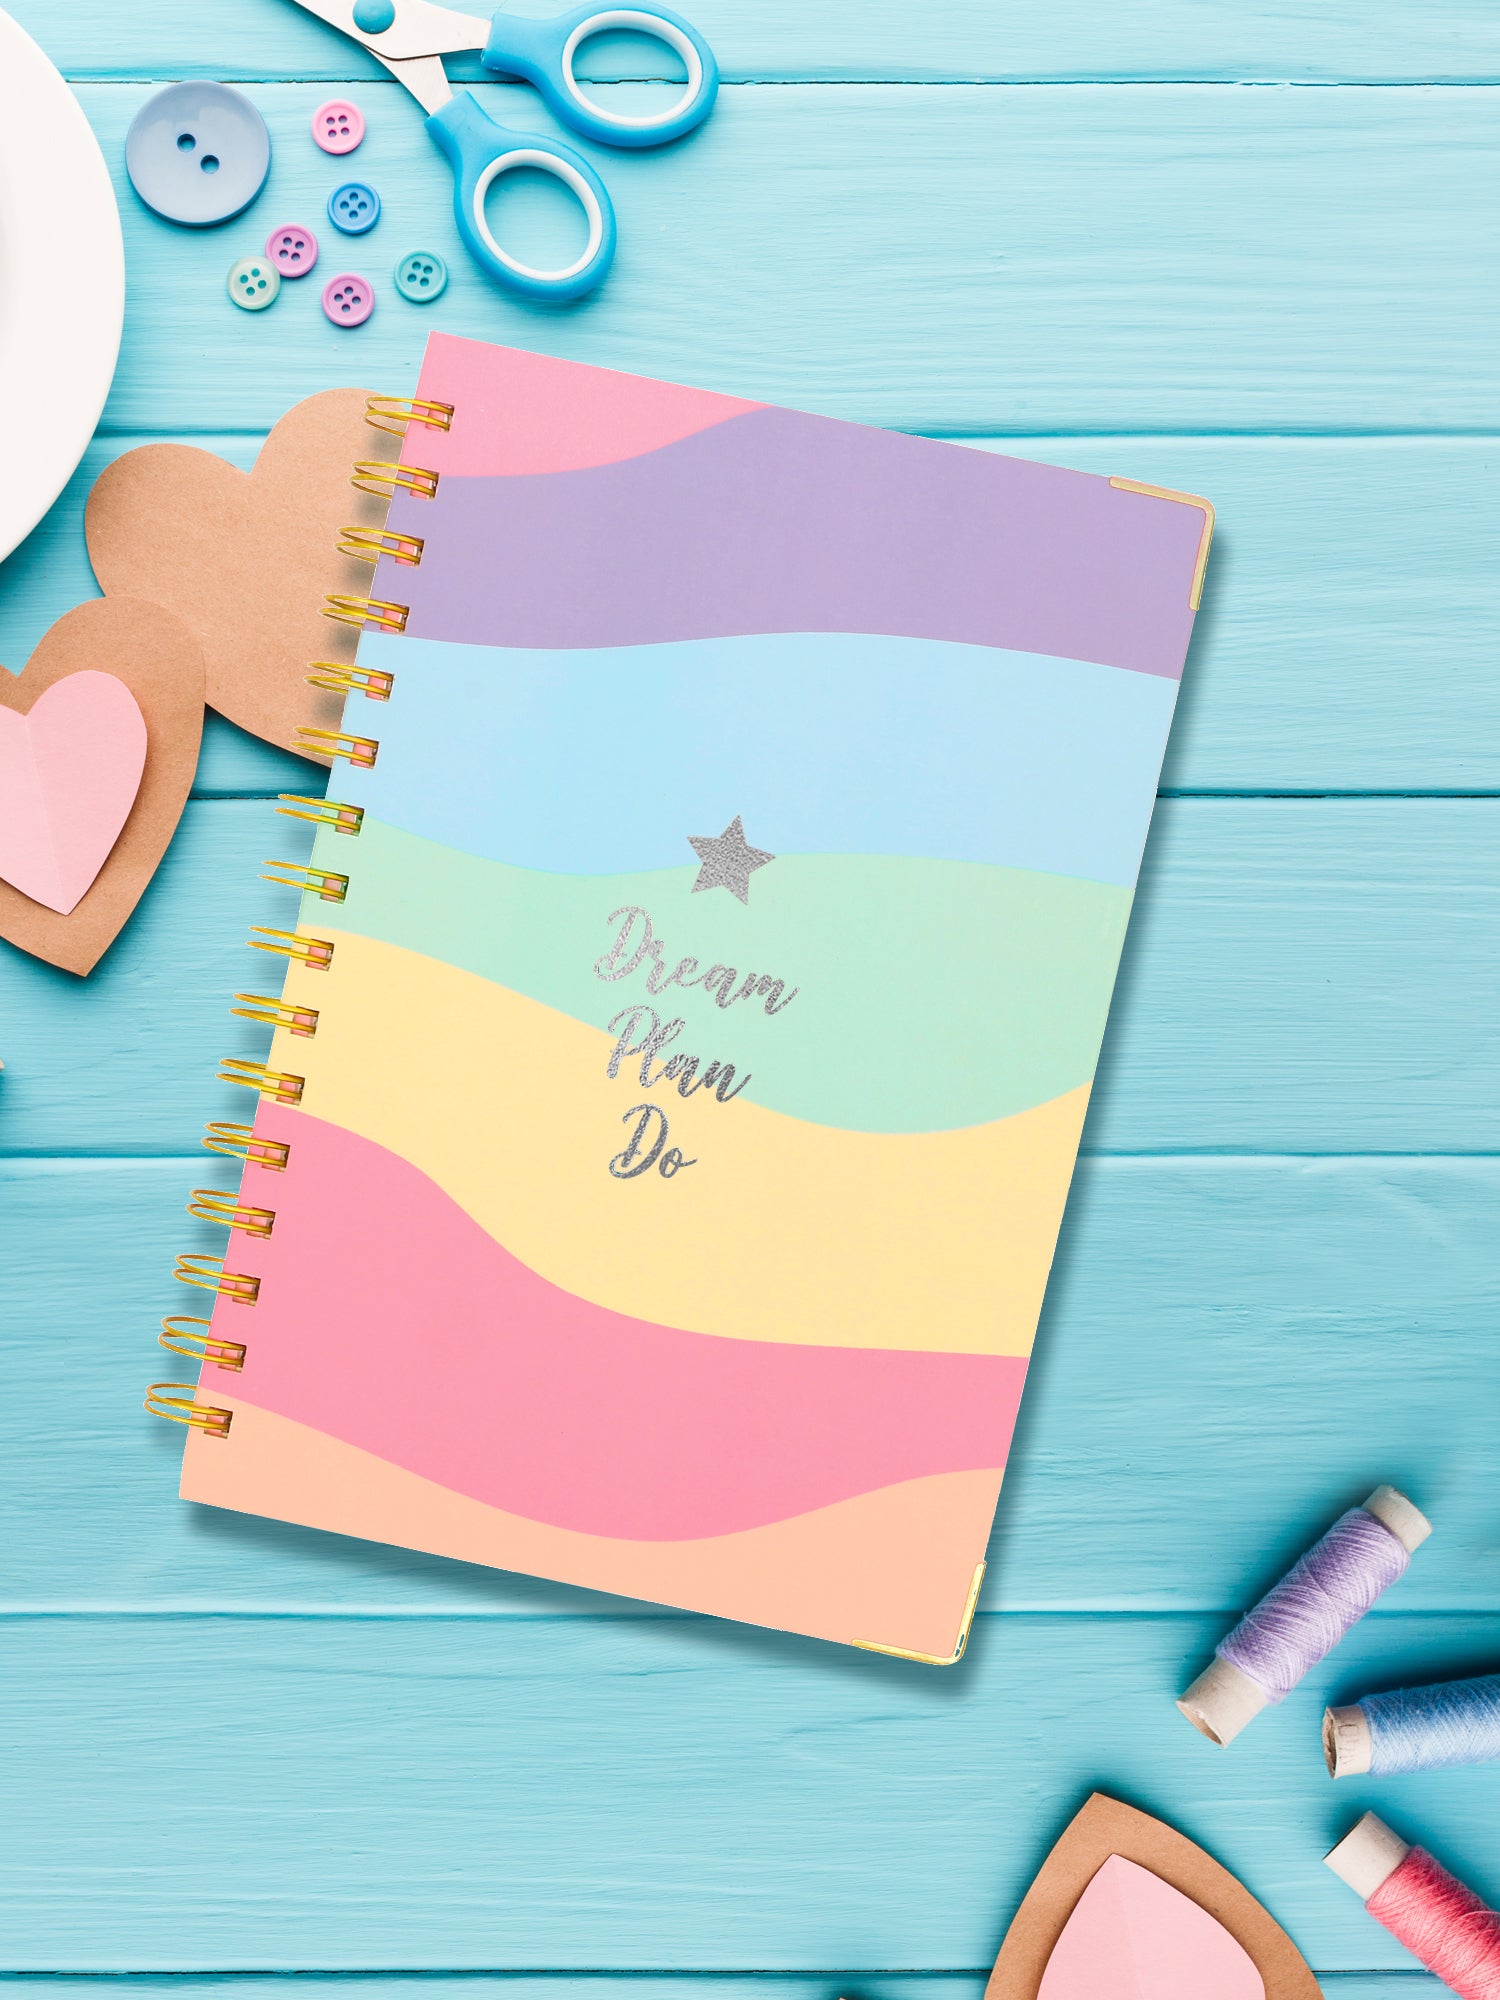 Doodle Pastel Rainbow - Plans Hard Bound A5 Daily Planner - DoodleCollection Store